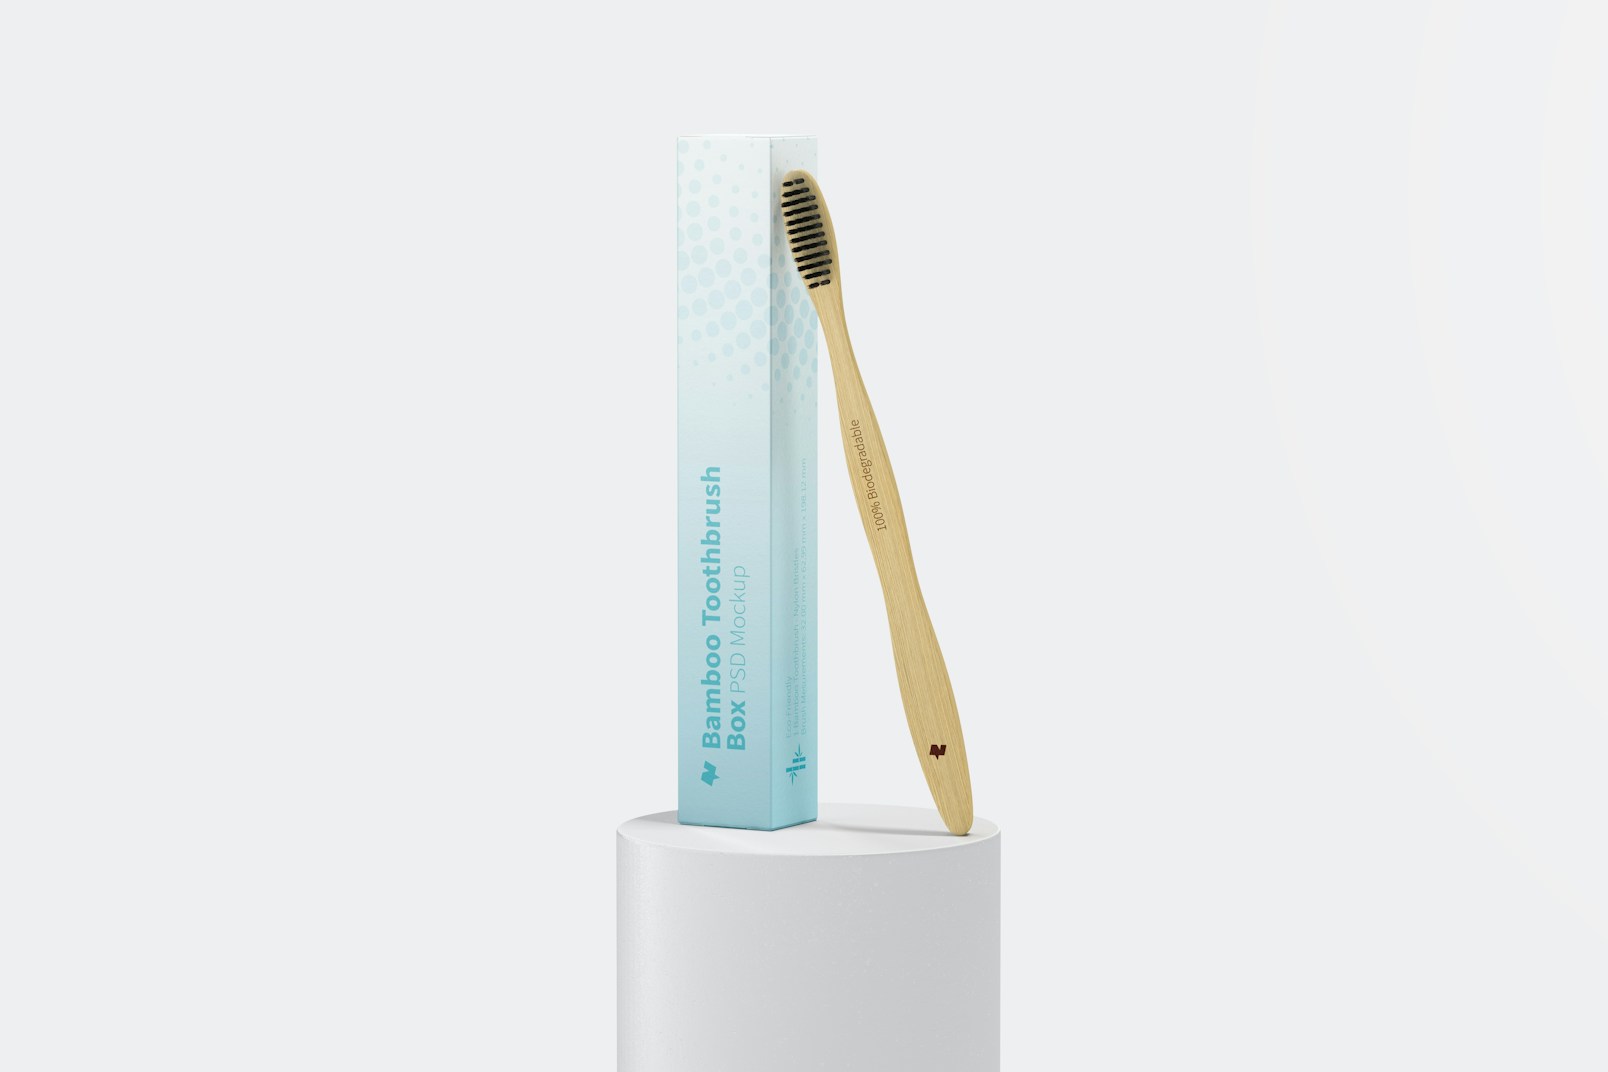 Bamboo Toothbrush with Box on Surface Mockup